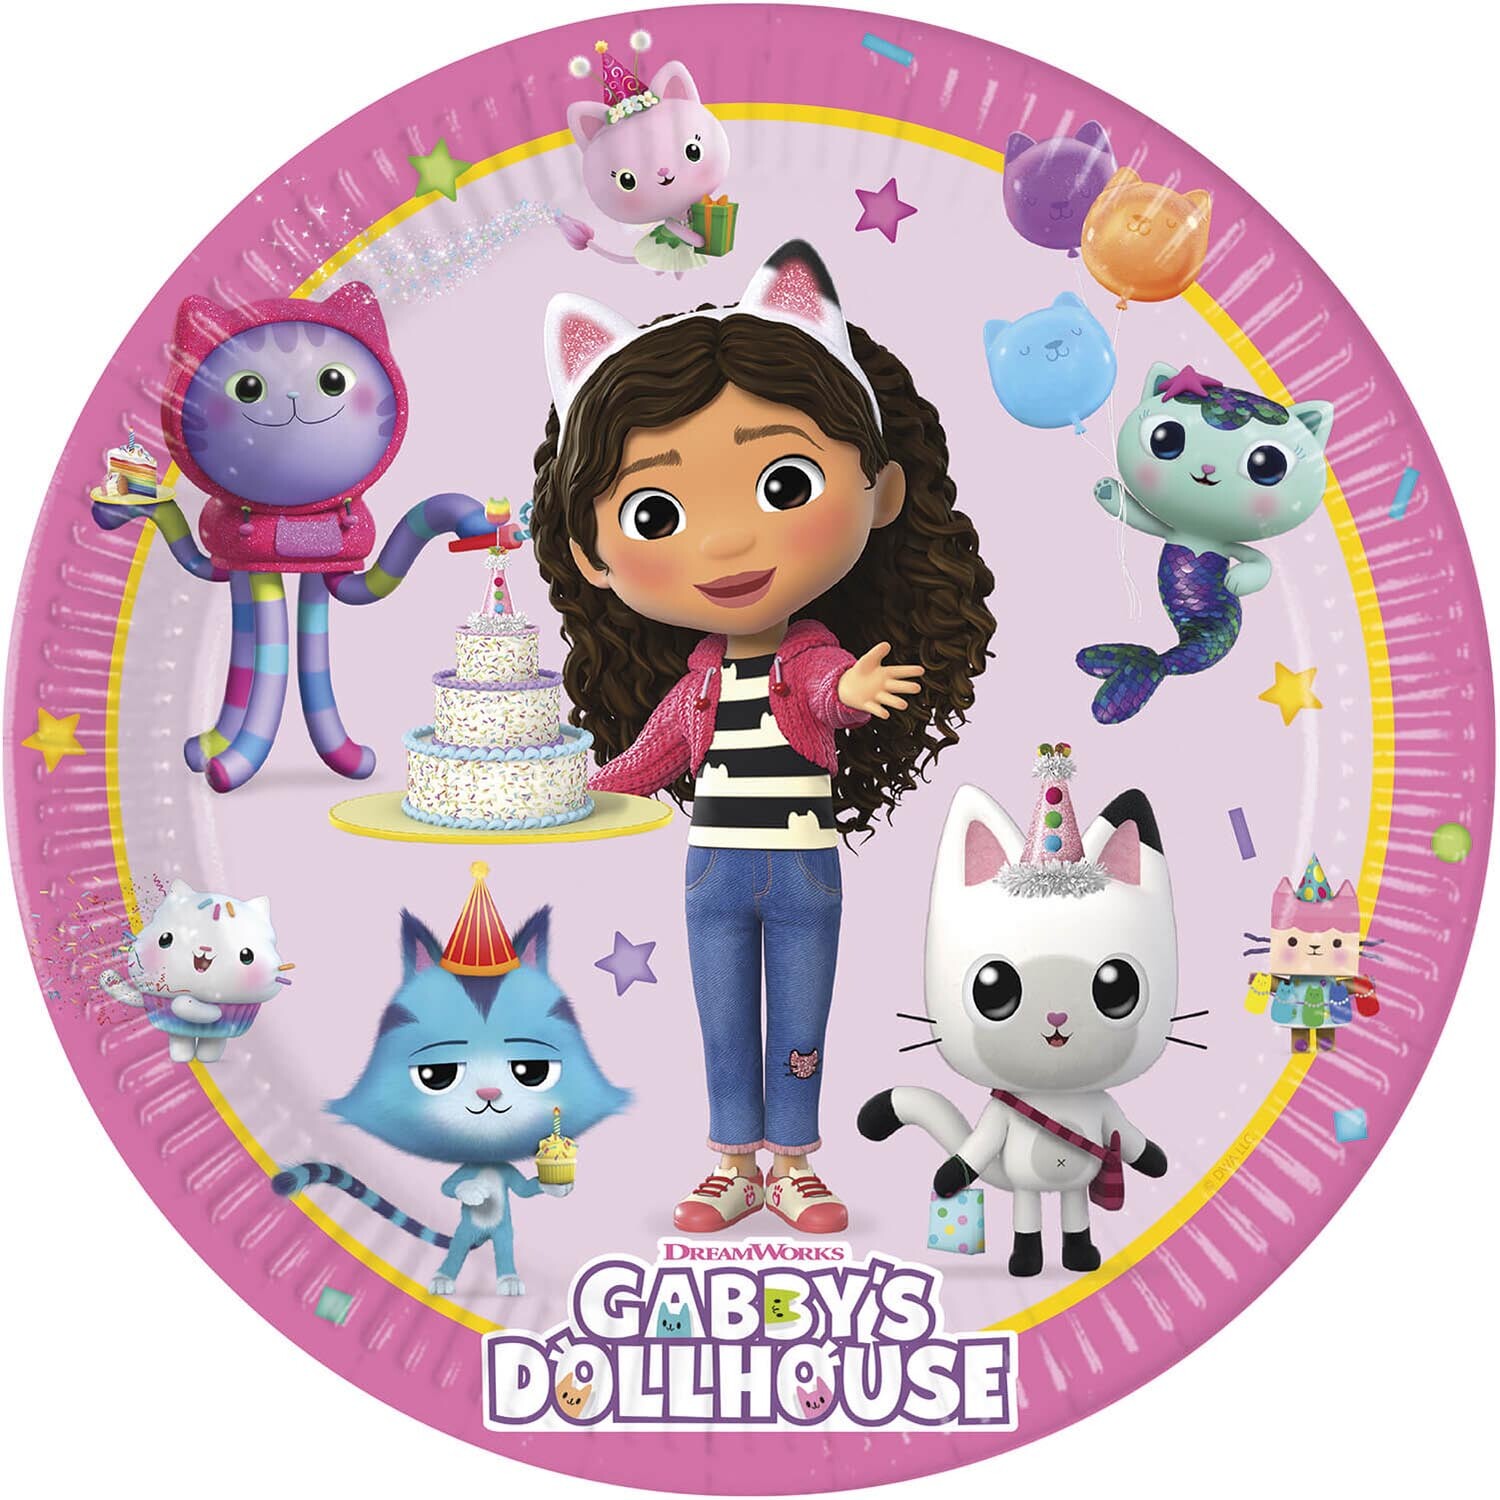 Pack of 8 Gabby's Dollhouse Paper Plates  - Pink Image